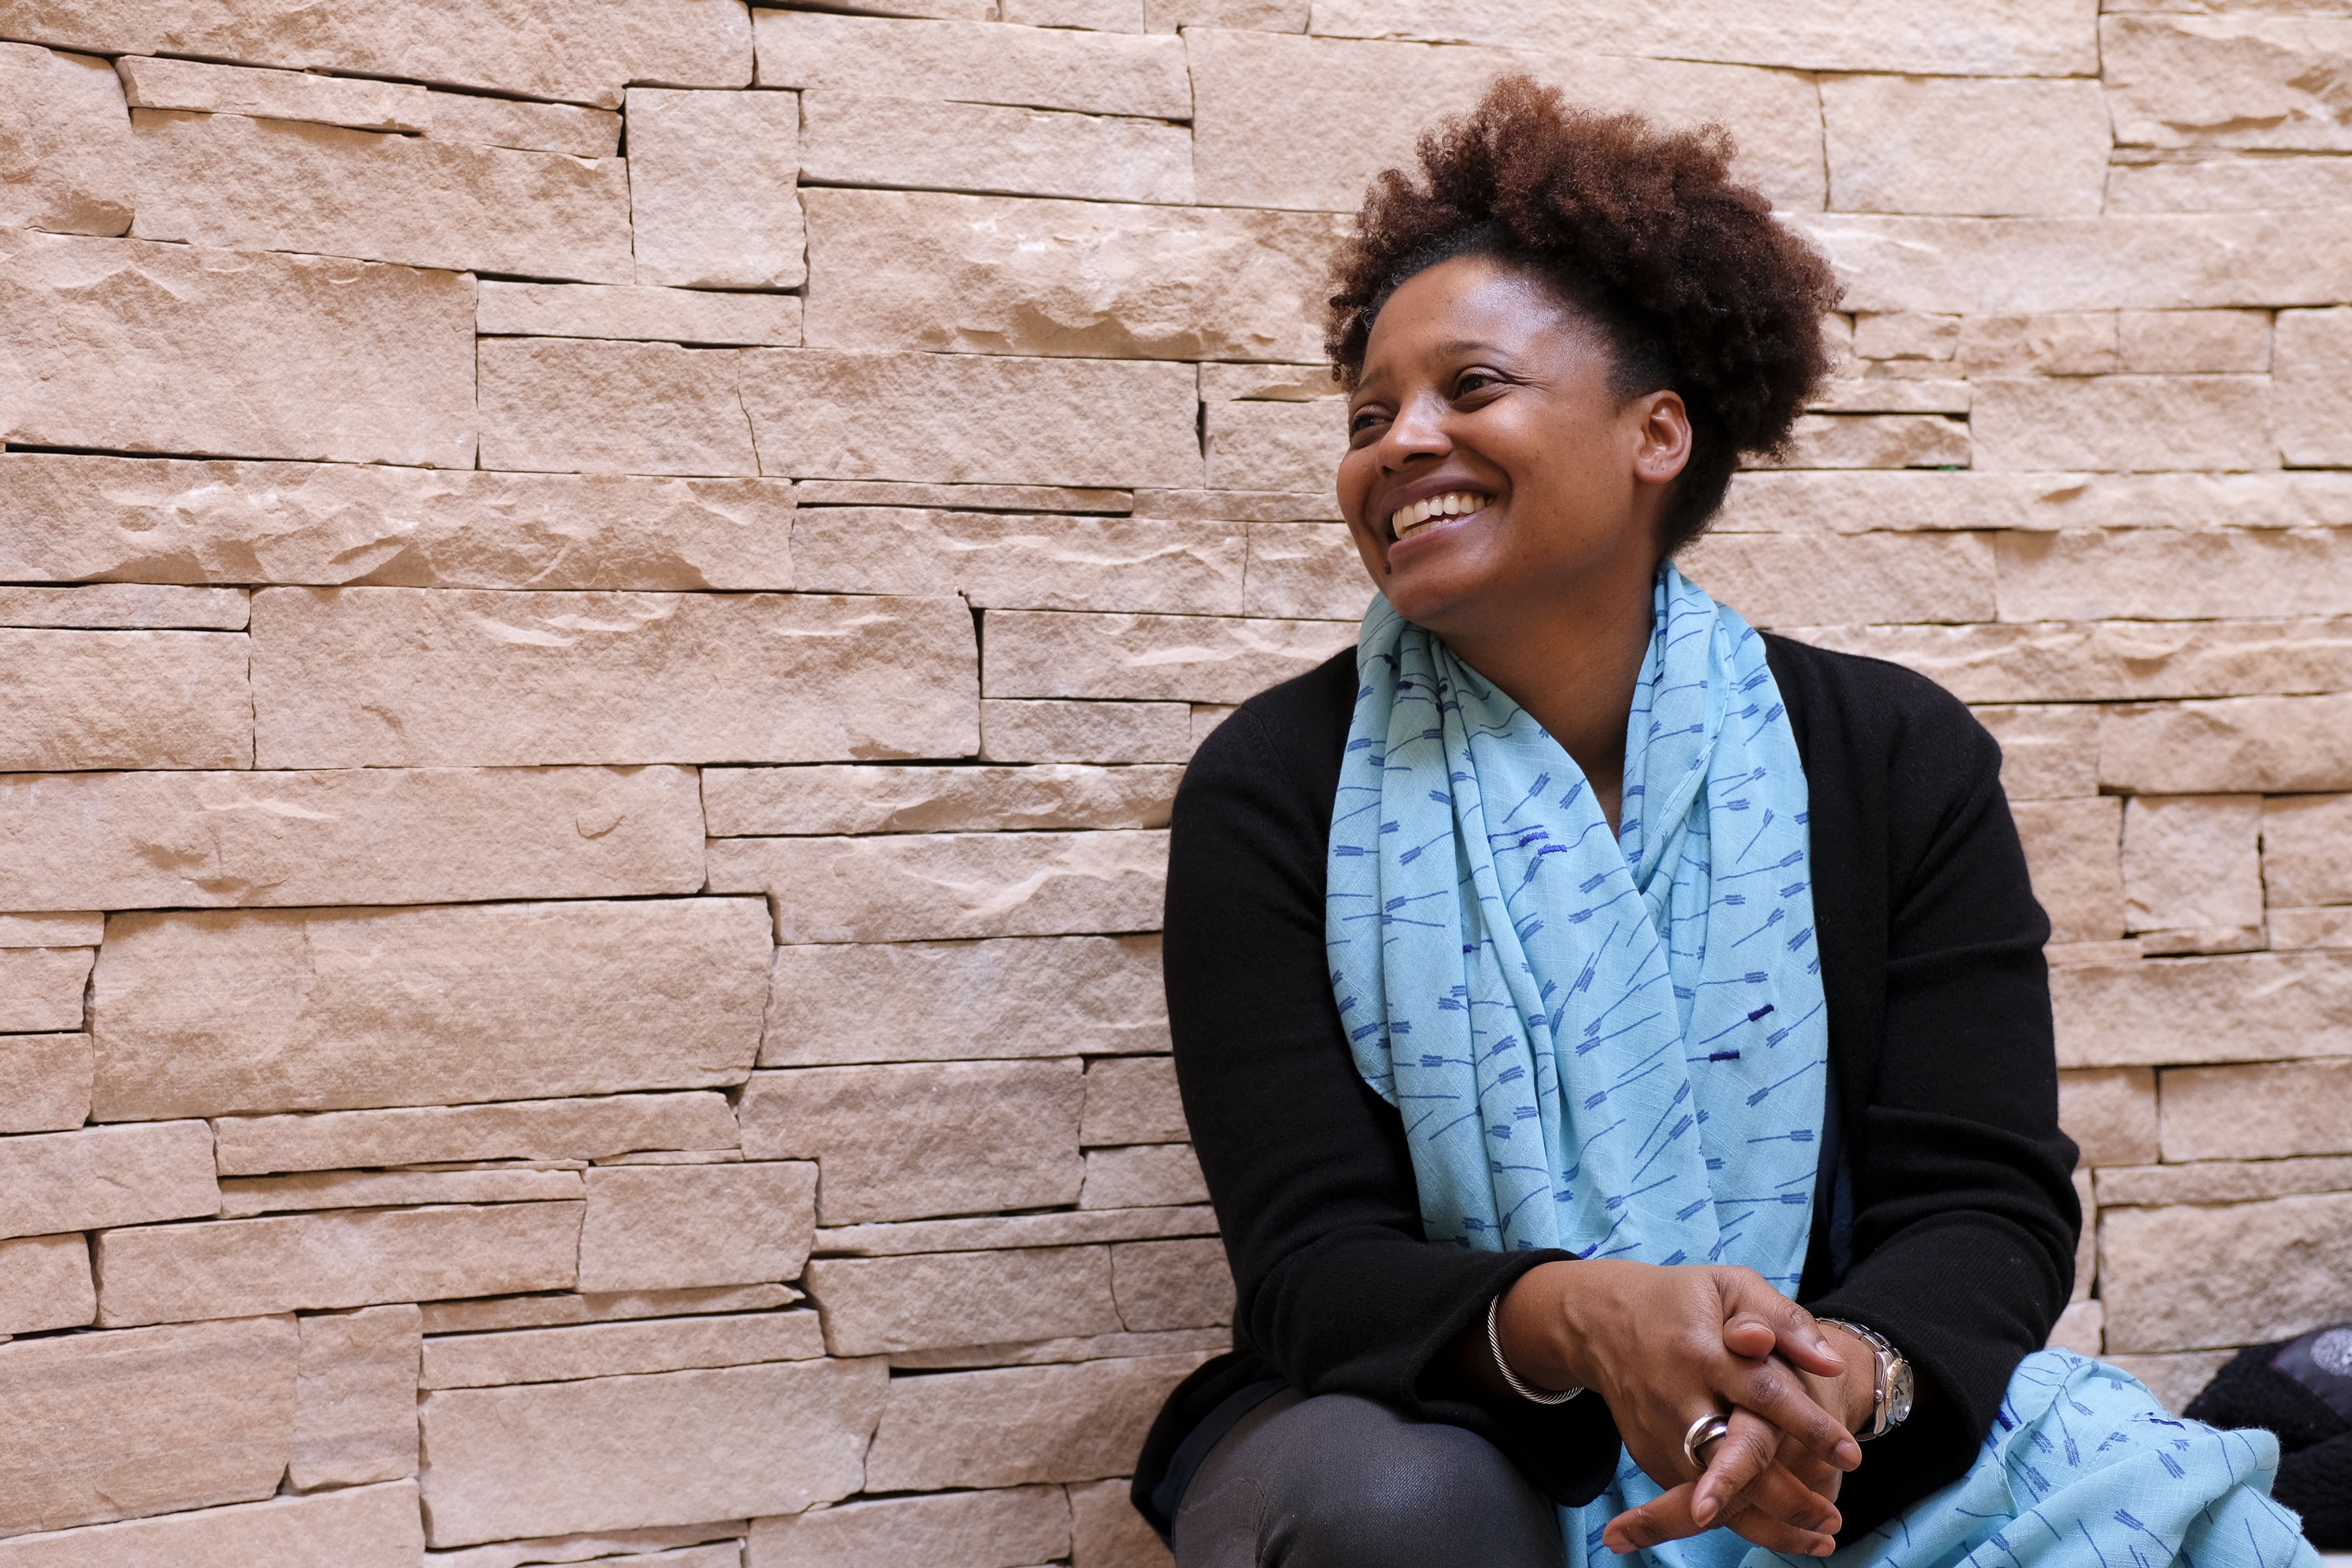 U.S. Poet Laureate Brings Poetry To Podcast And Radio Audiences With The Slowdown by Tracy K. Smith for Poetry Foundation